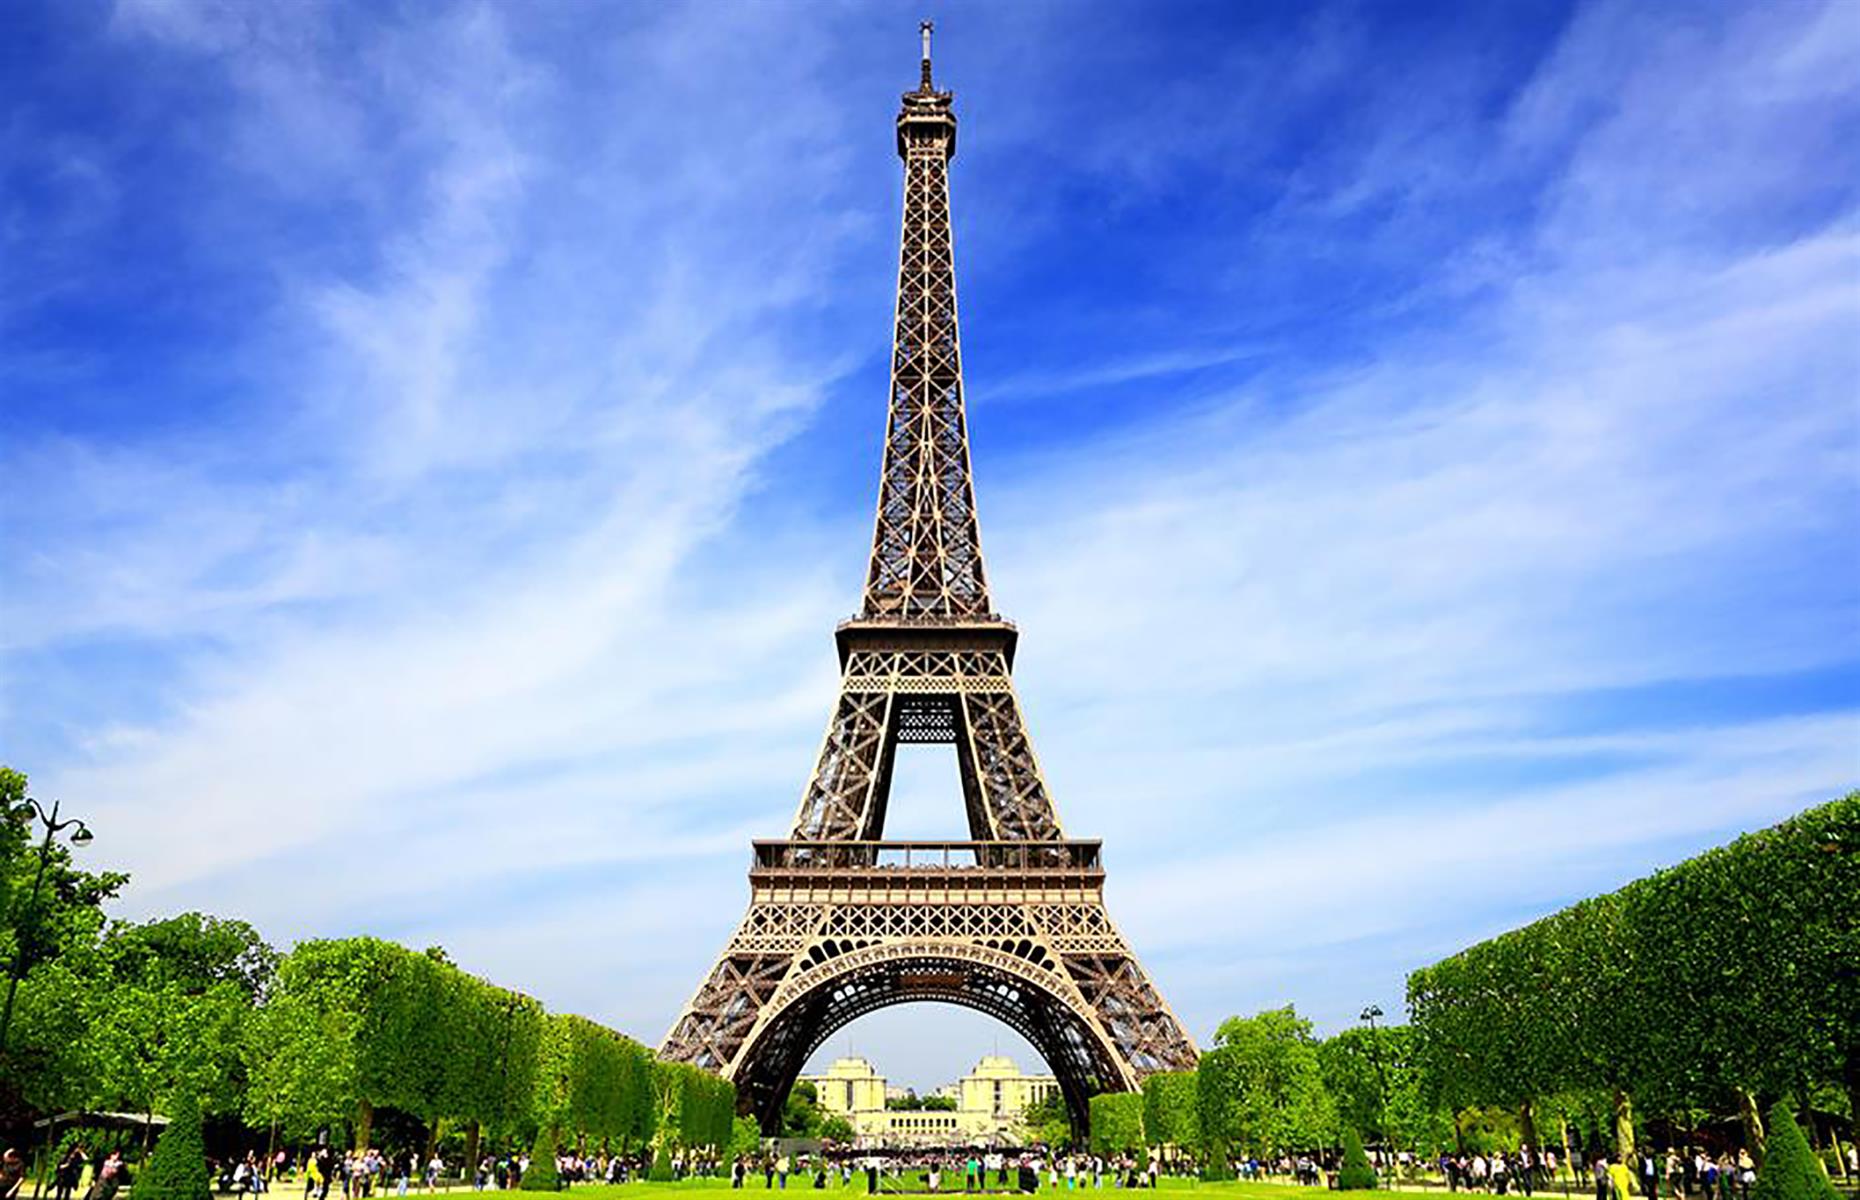 21. The Eiffel Tower is really ugly